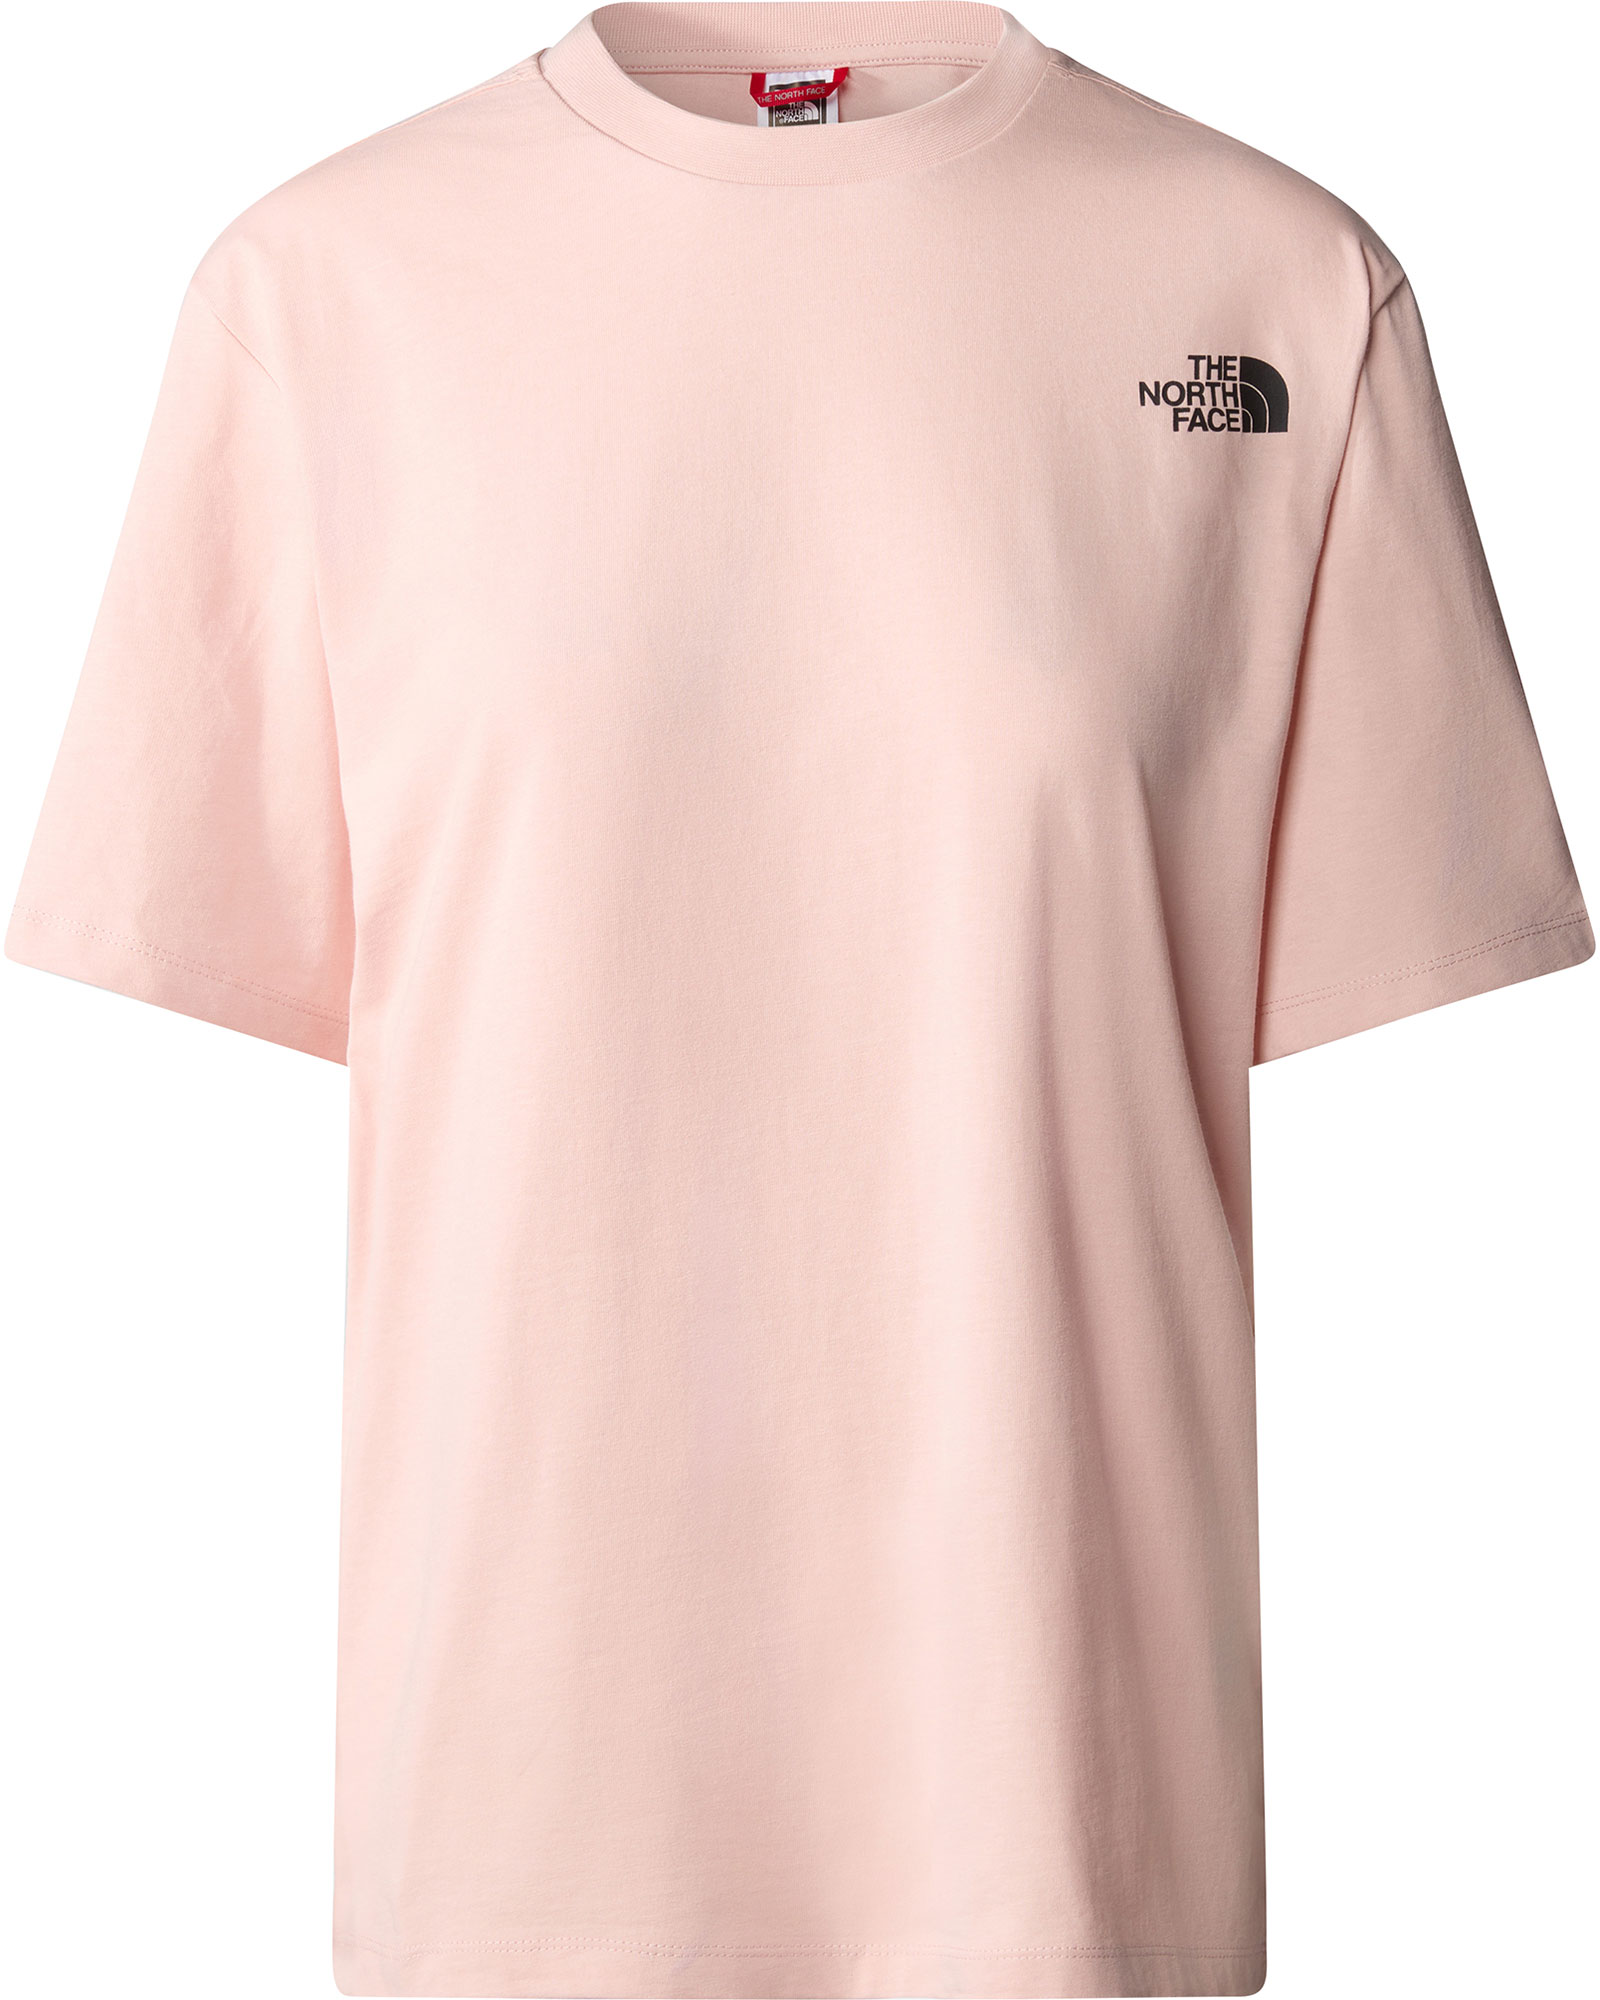 The North Face Relaxed Redbox Women’s T Shirt - Pink Moss S